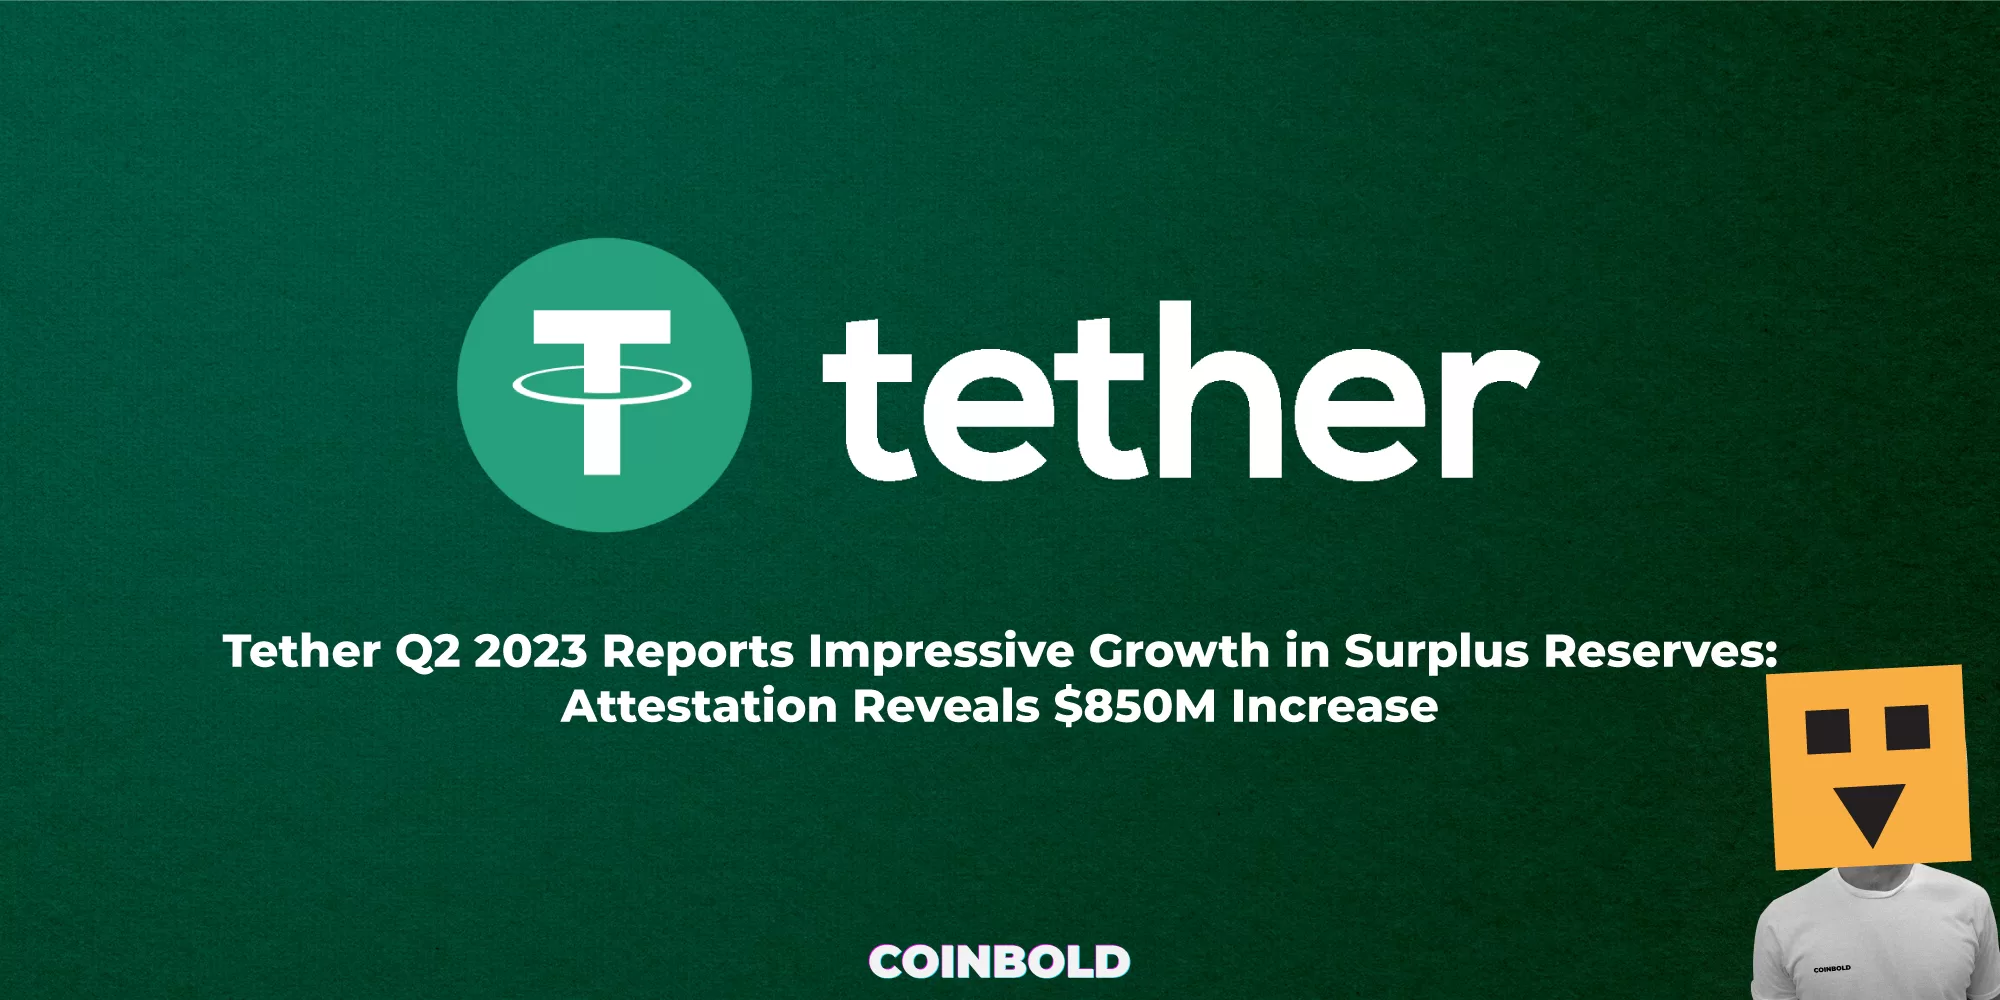 Tether Q2 2023 Reports Impressive Growth in Surplus Reserves: Attestation Reveals $850M Increase